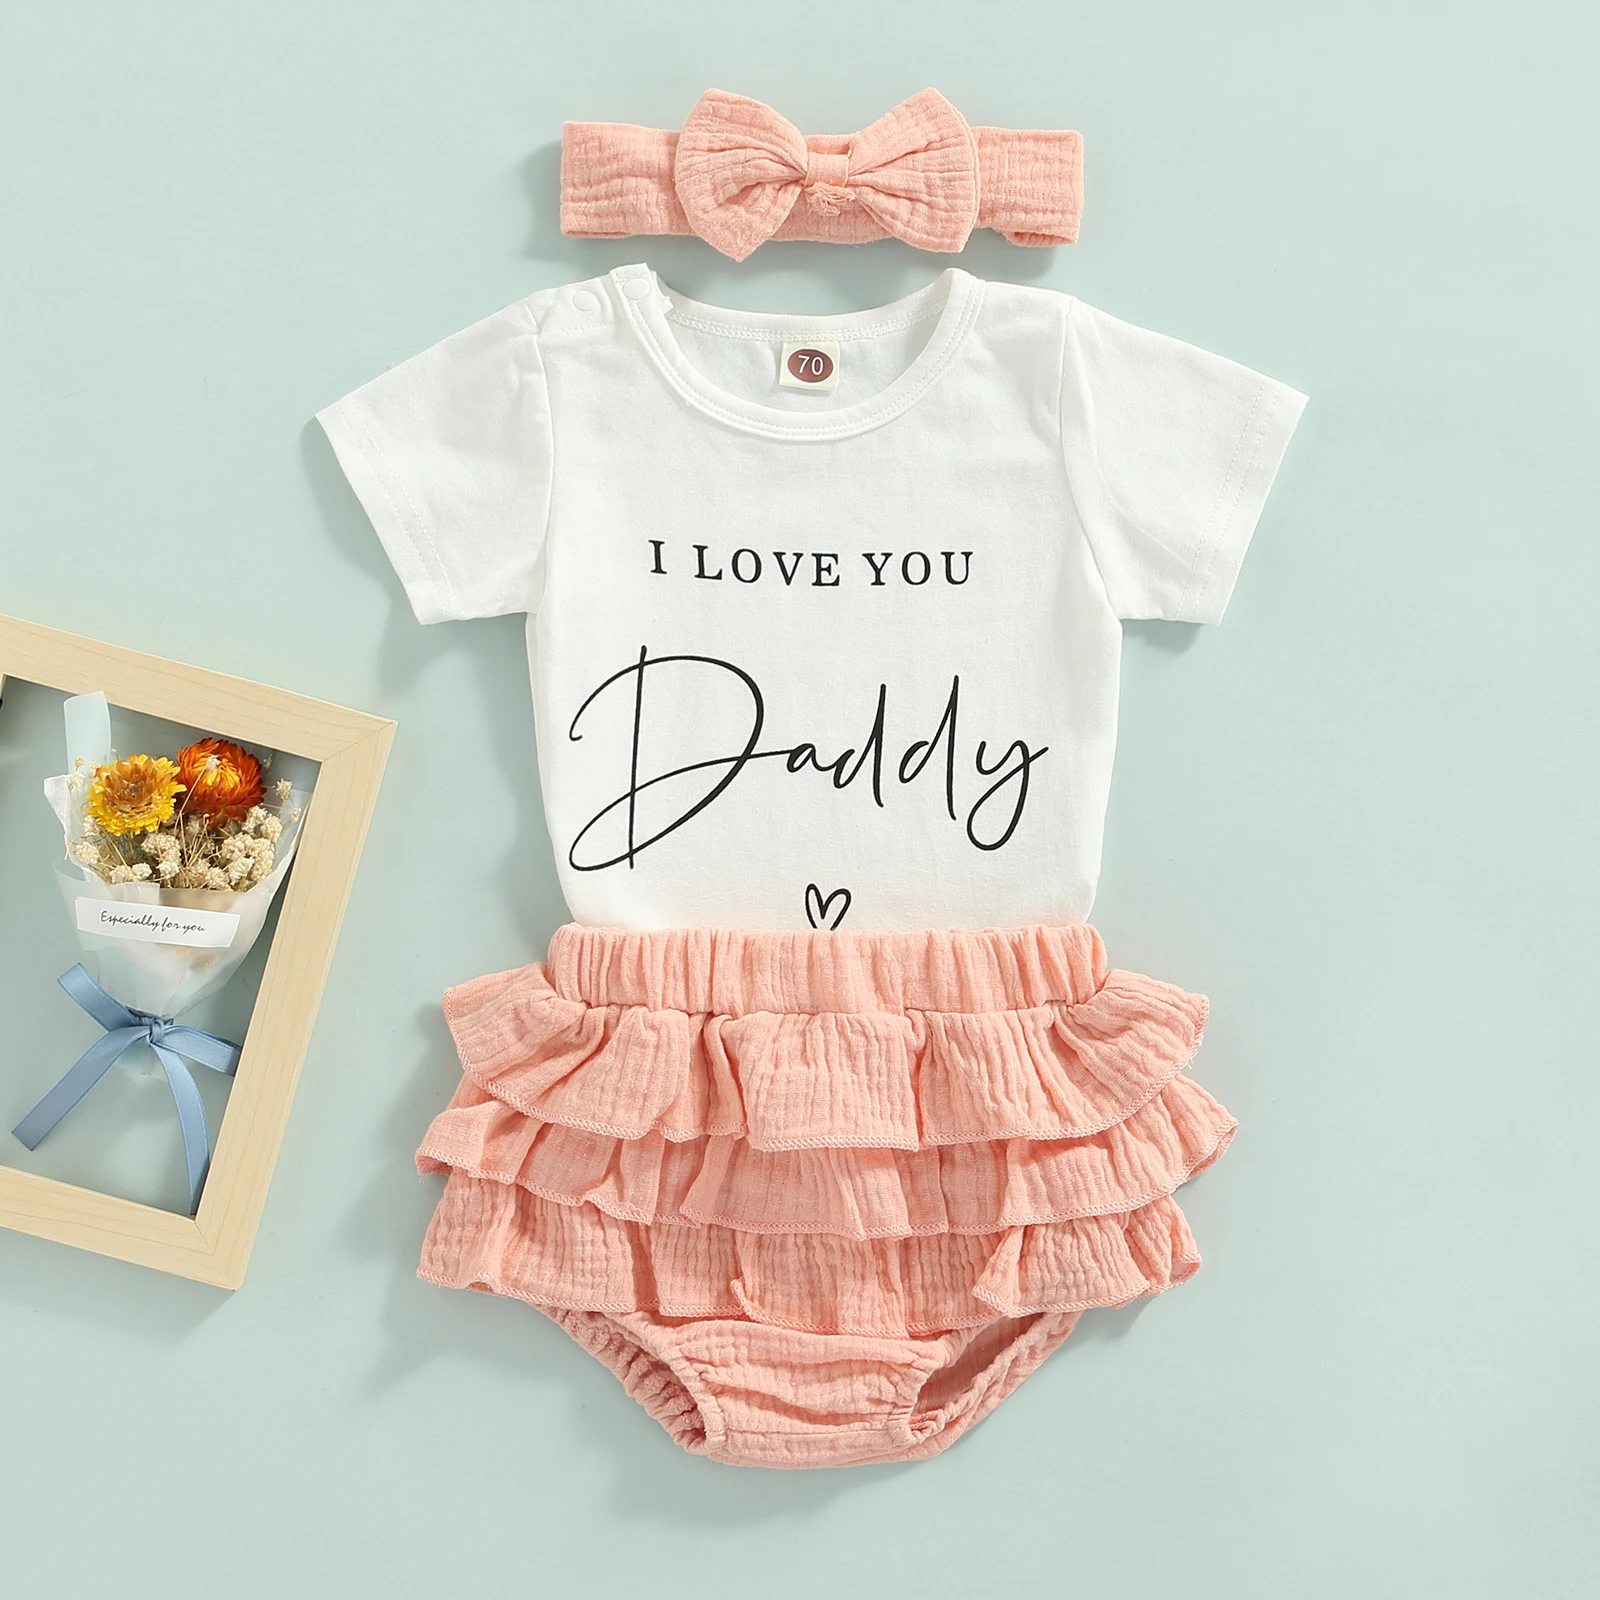 2022 0-18M Baby Girl Clothing I LOVE YOU DADDY Letter Print Short Sleeve T-shirt+Layered Ruffle Shorts Skirt+Bow Headband 3pcs baby's complete set of clothing